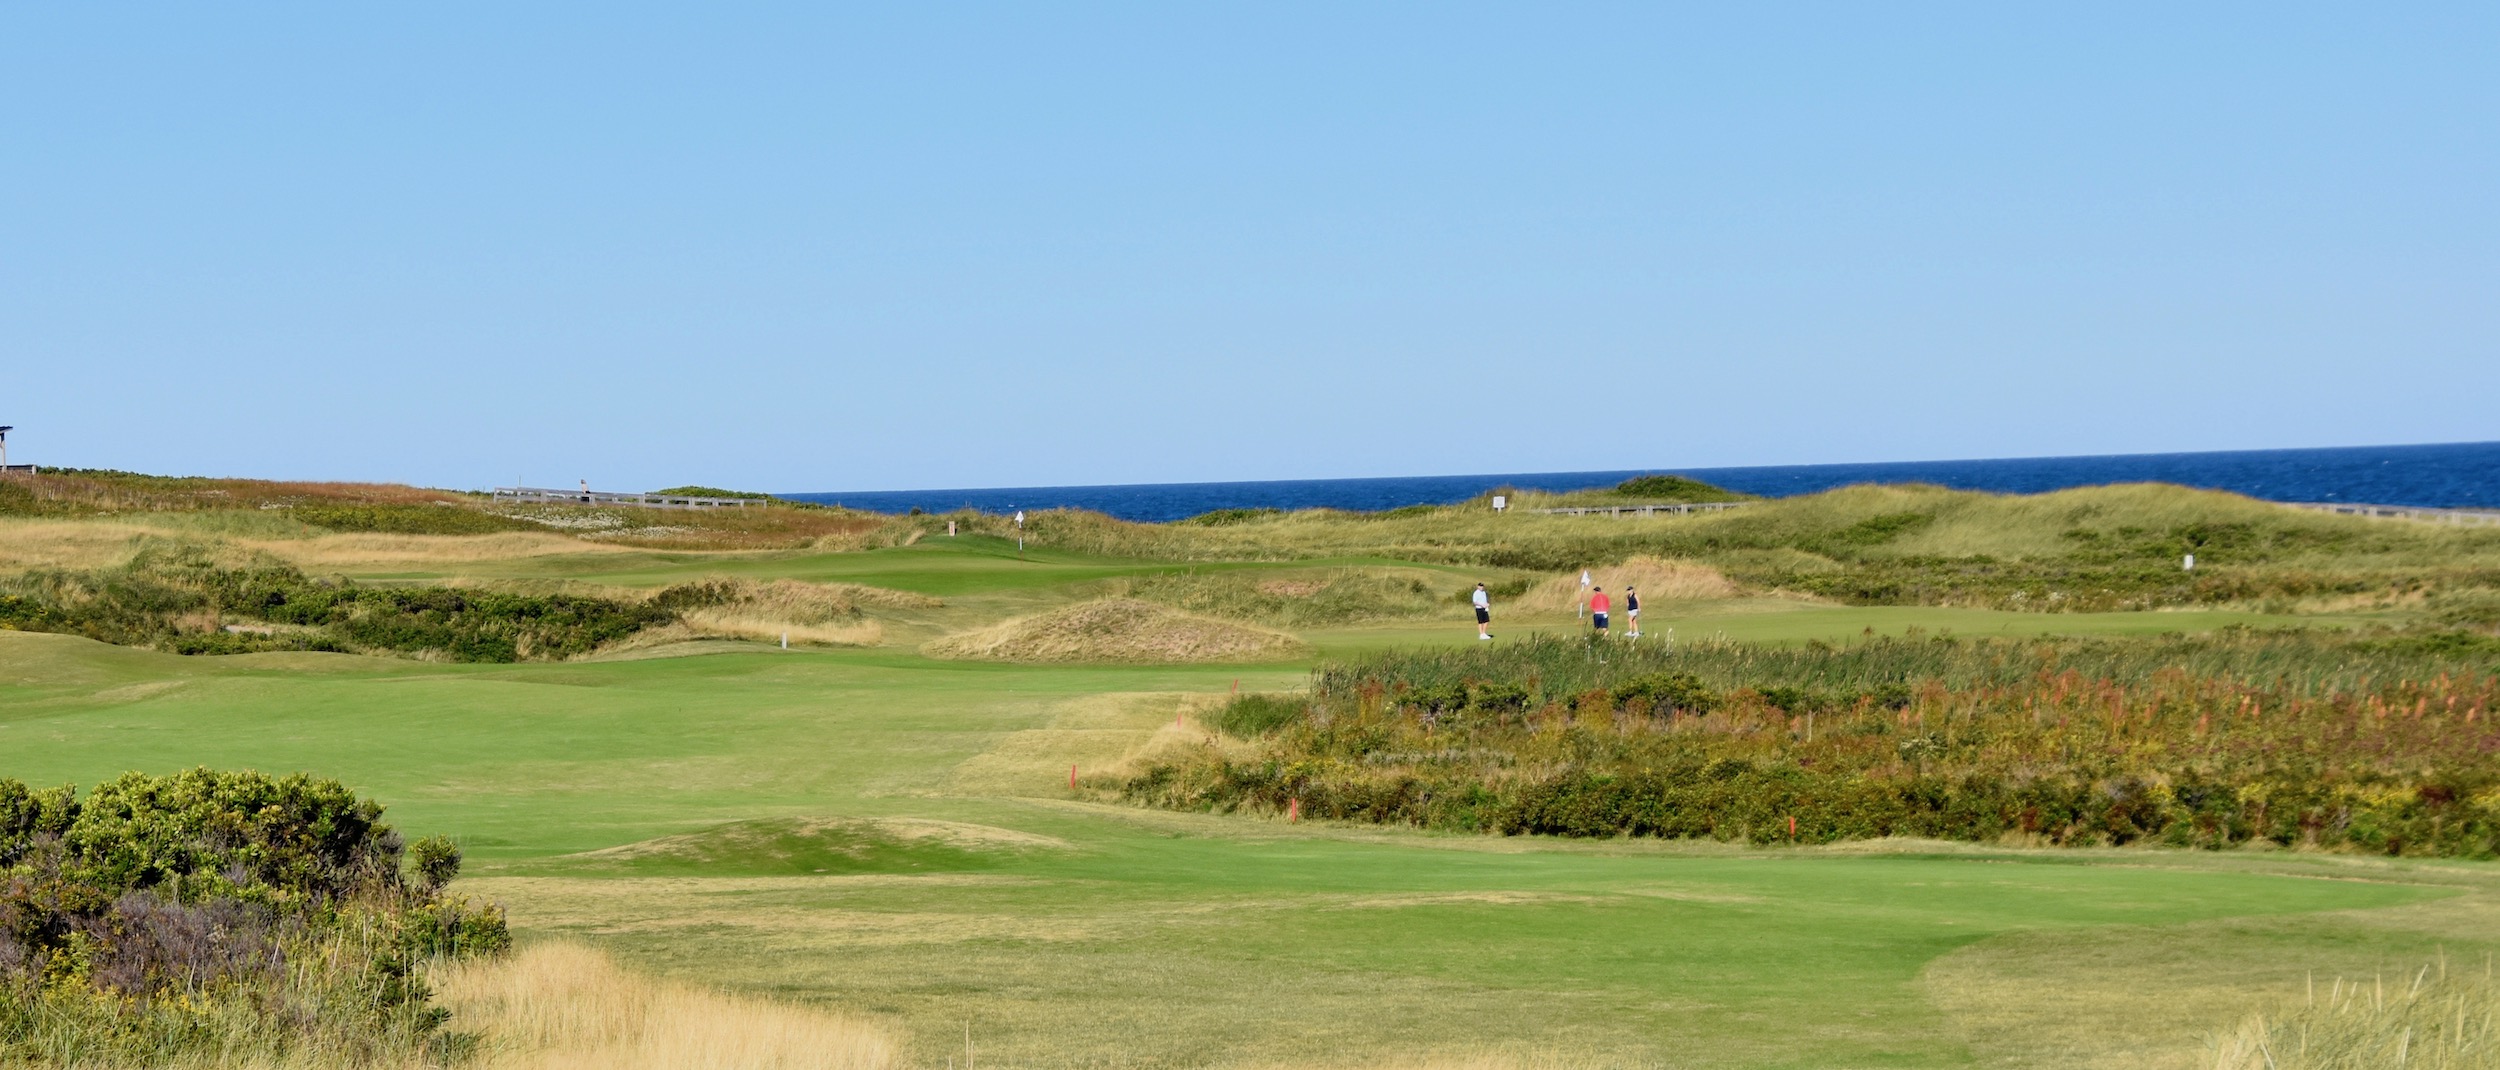 Photo of # 2 Cabot Links